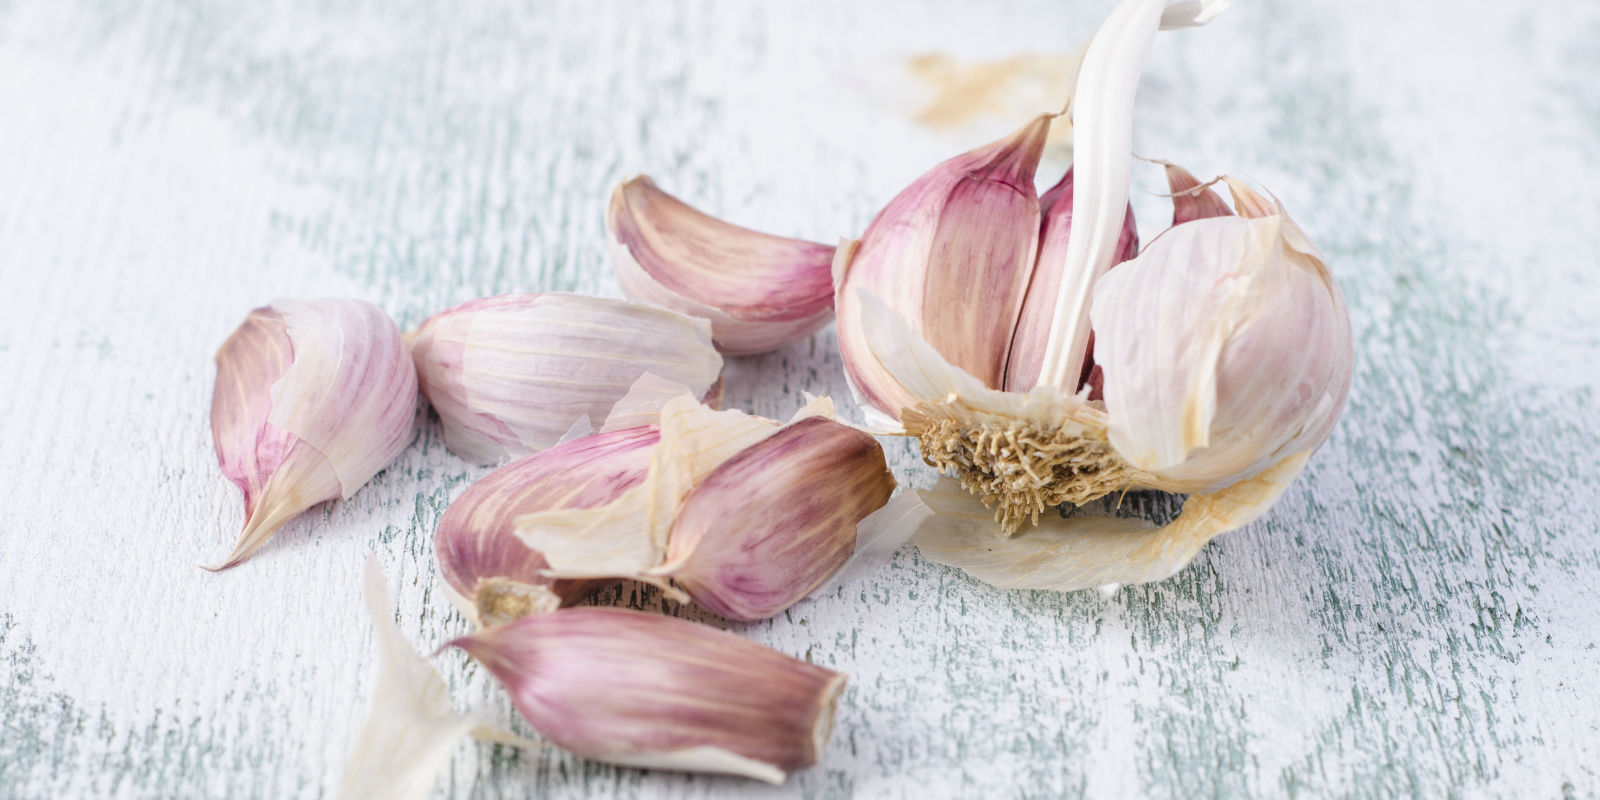 How To Store Unused Garlic Cloves